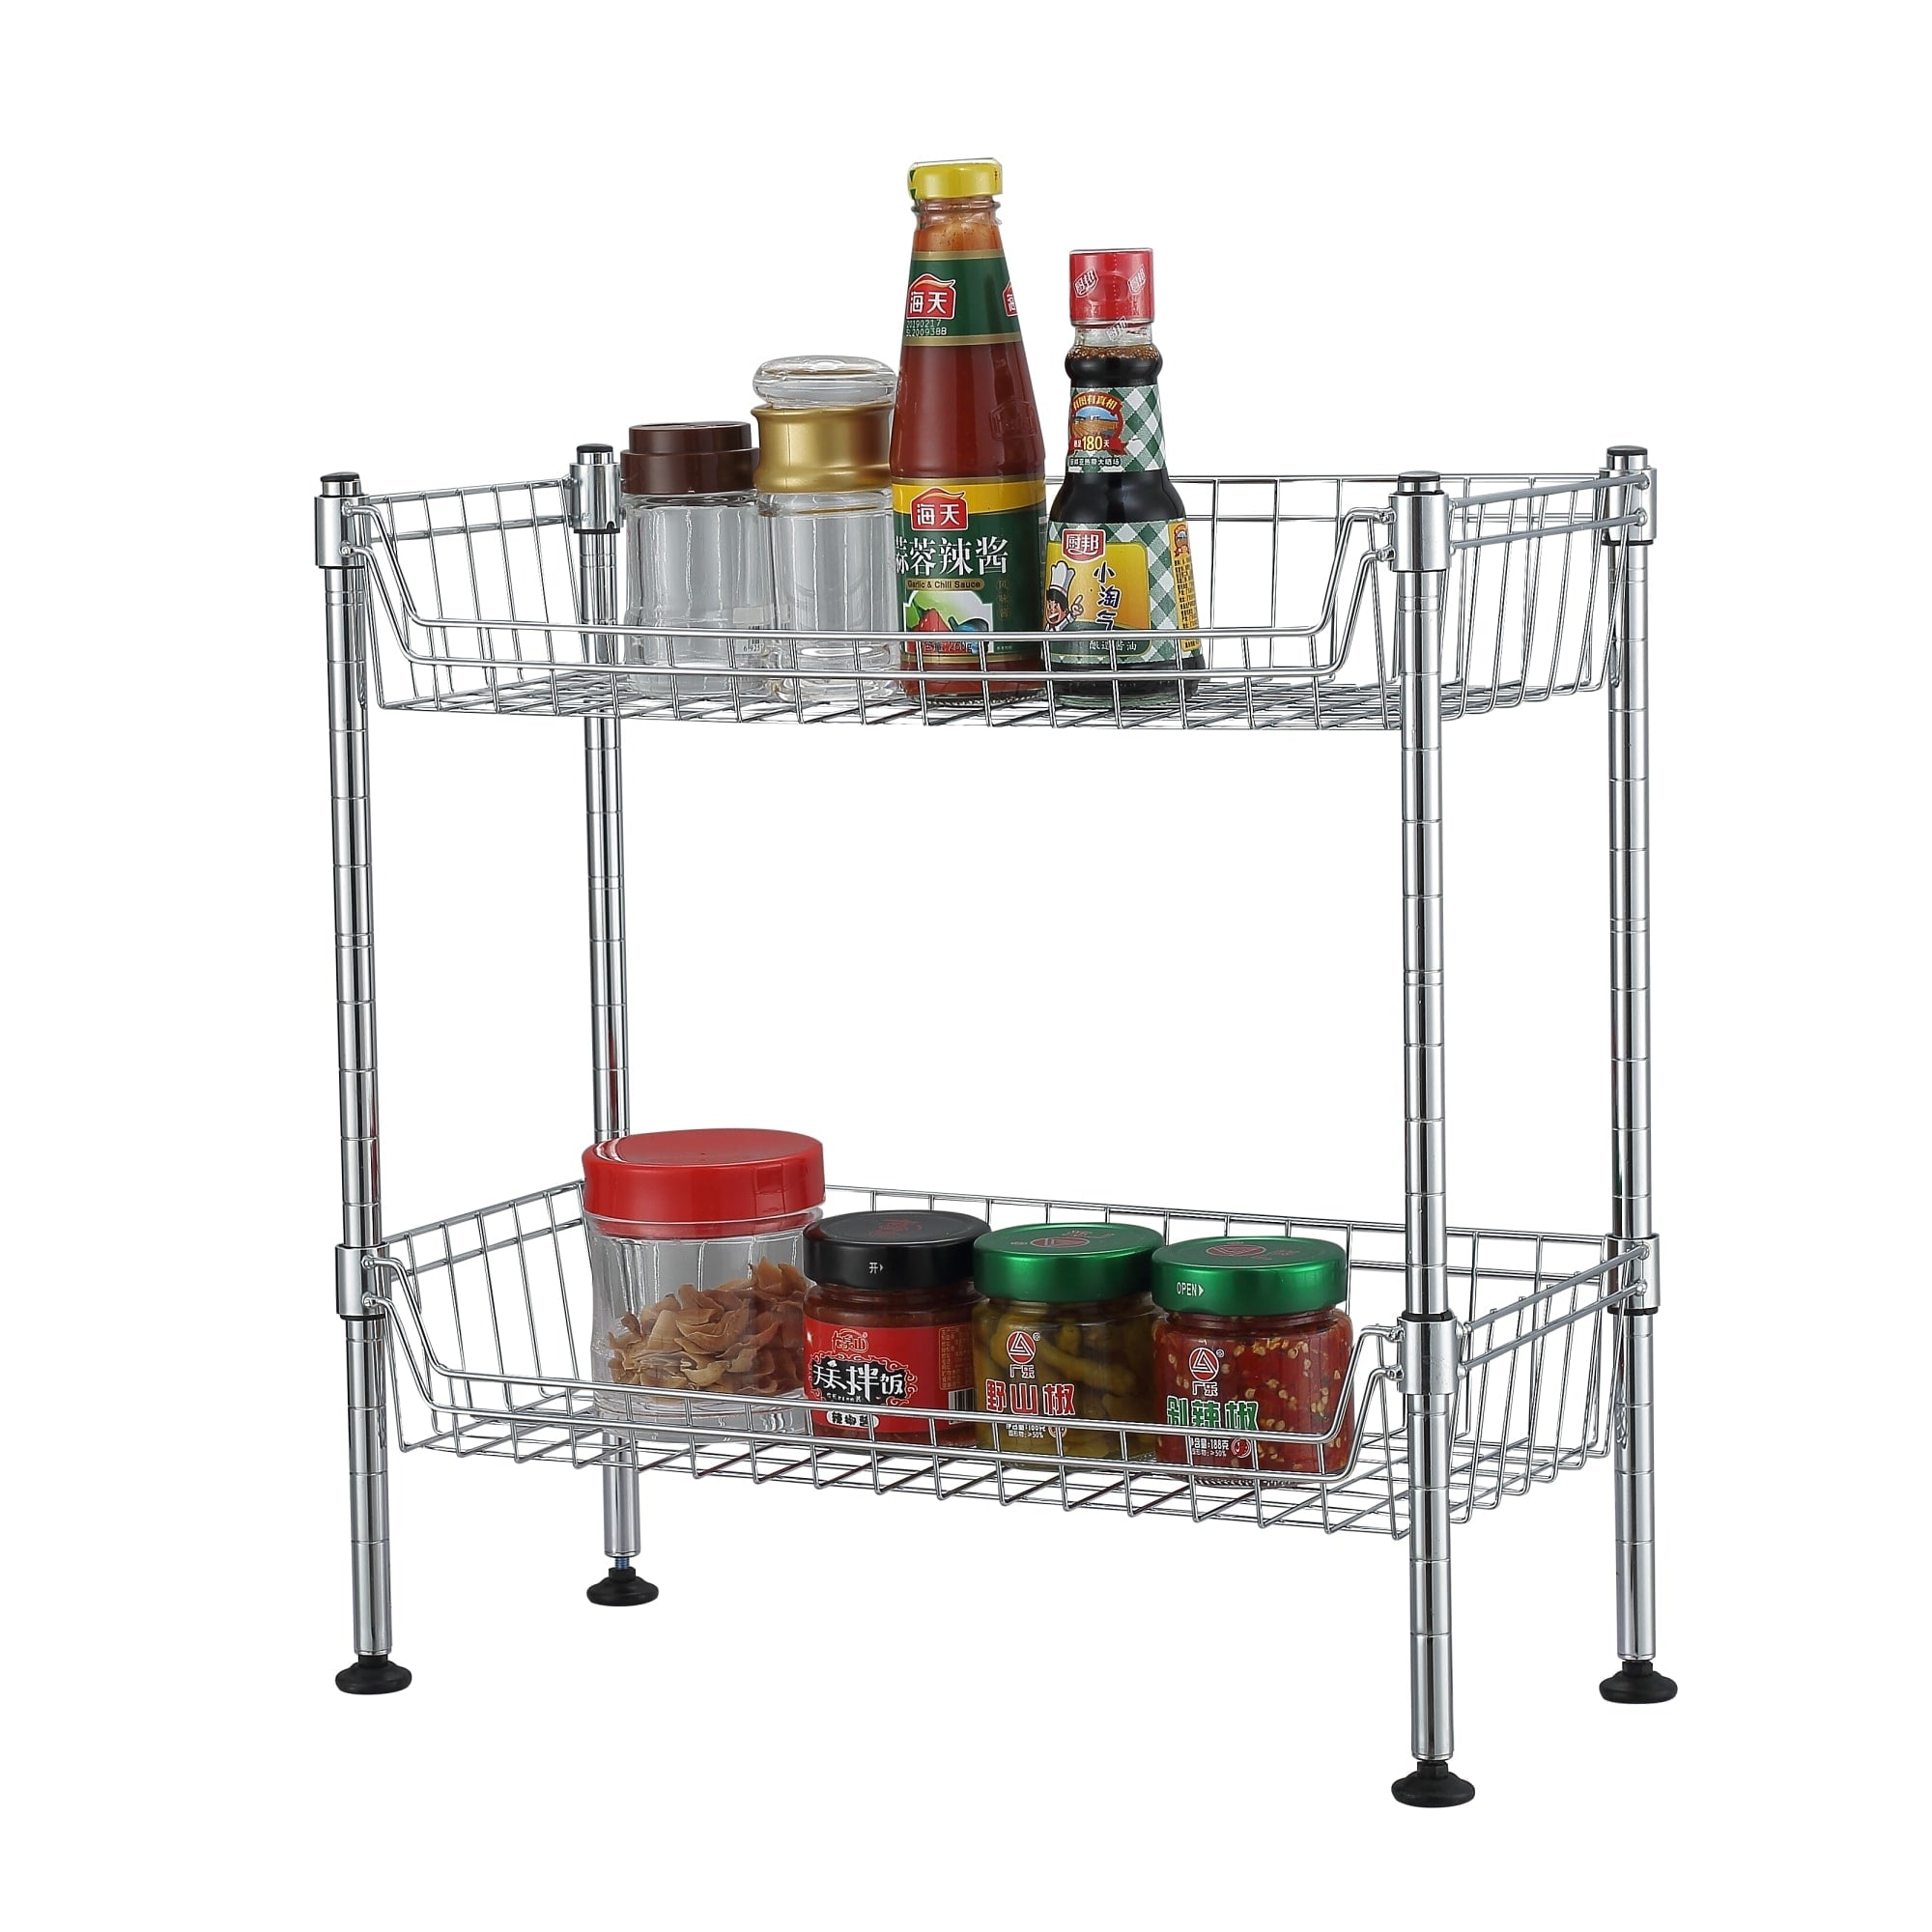 Home Basics 2 Tier Standing Wire Basket, Chrome $20.00 EACH, CASE PACK OF 1